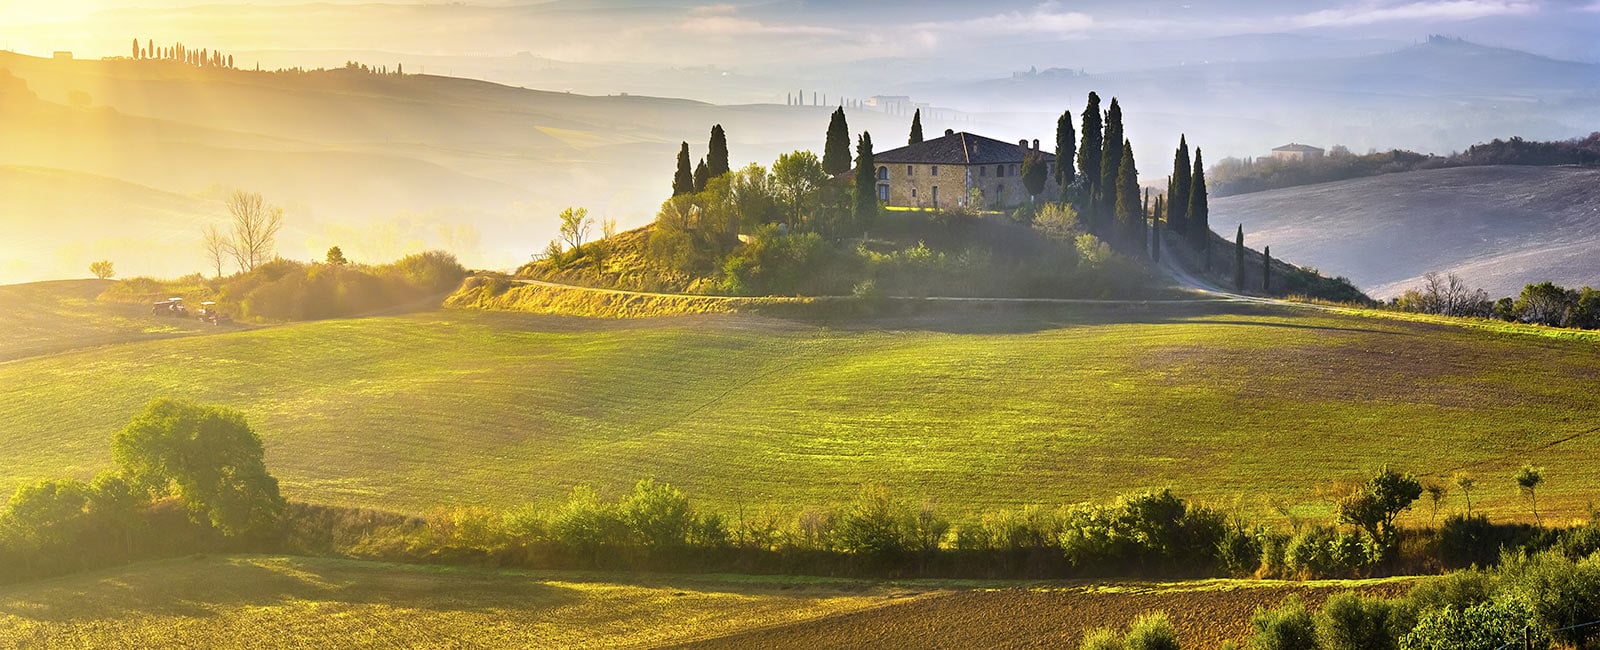 Enjoy a vacation in Tuscany, Italy with Hilton Grand Vacations